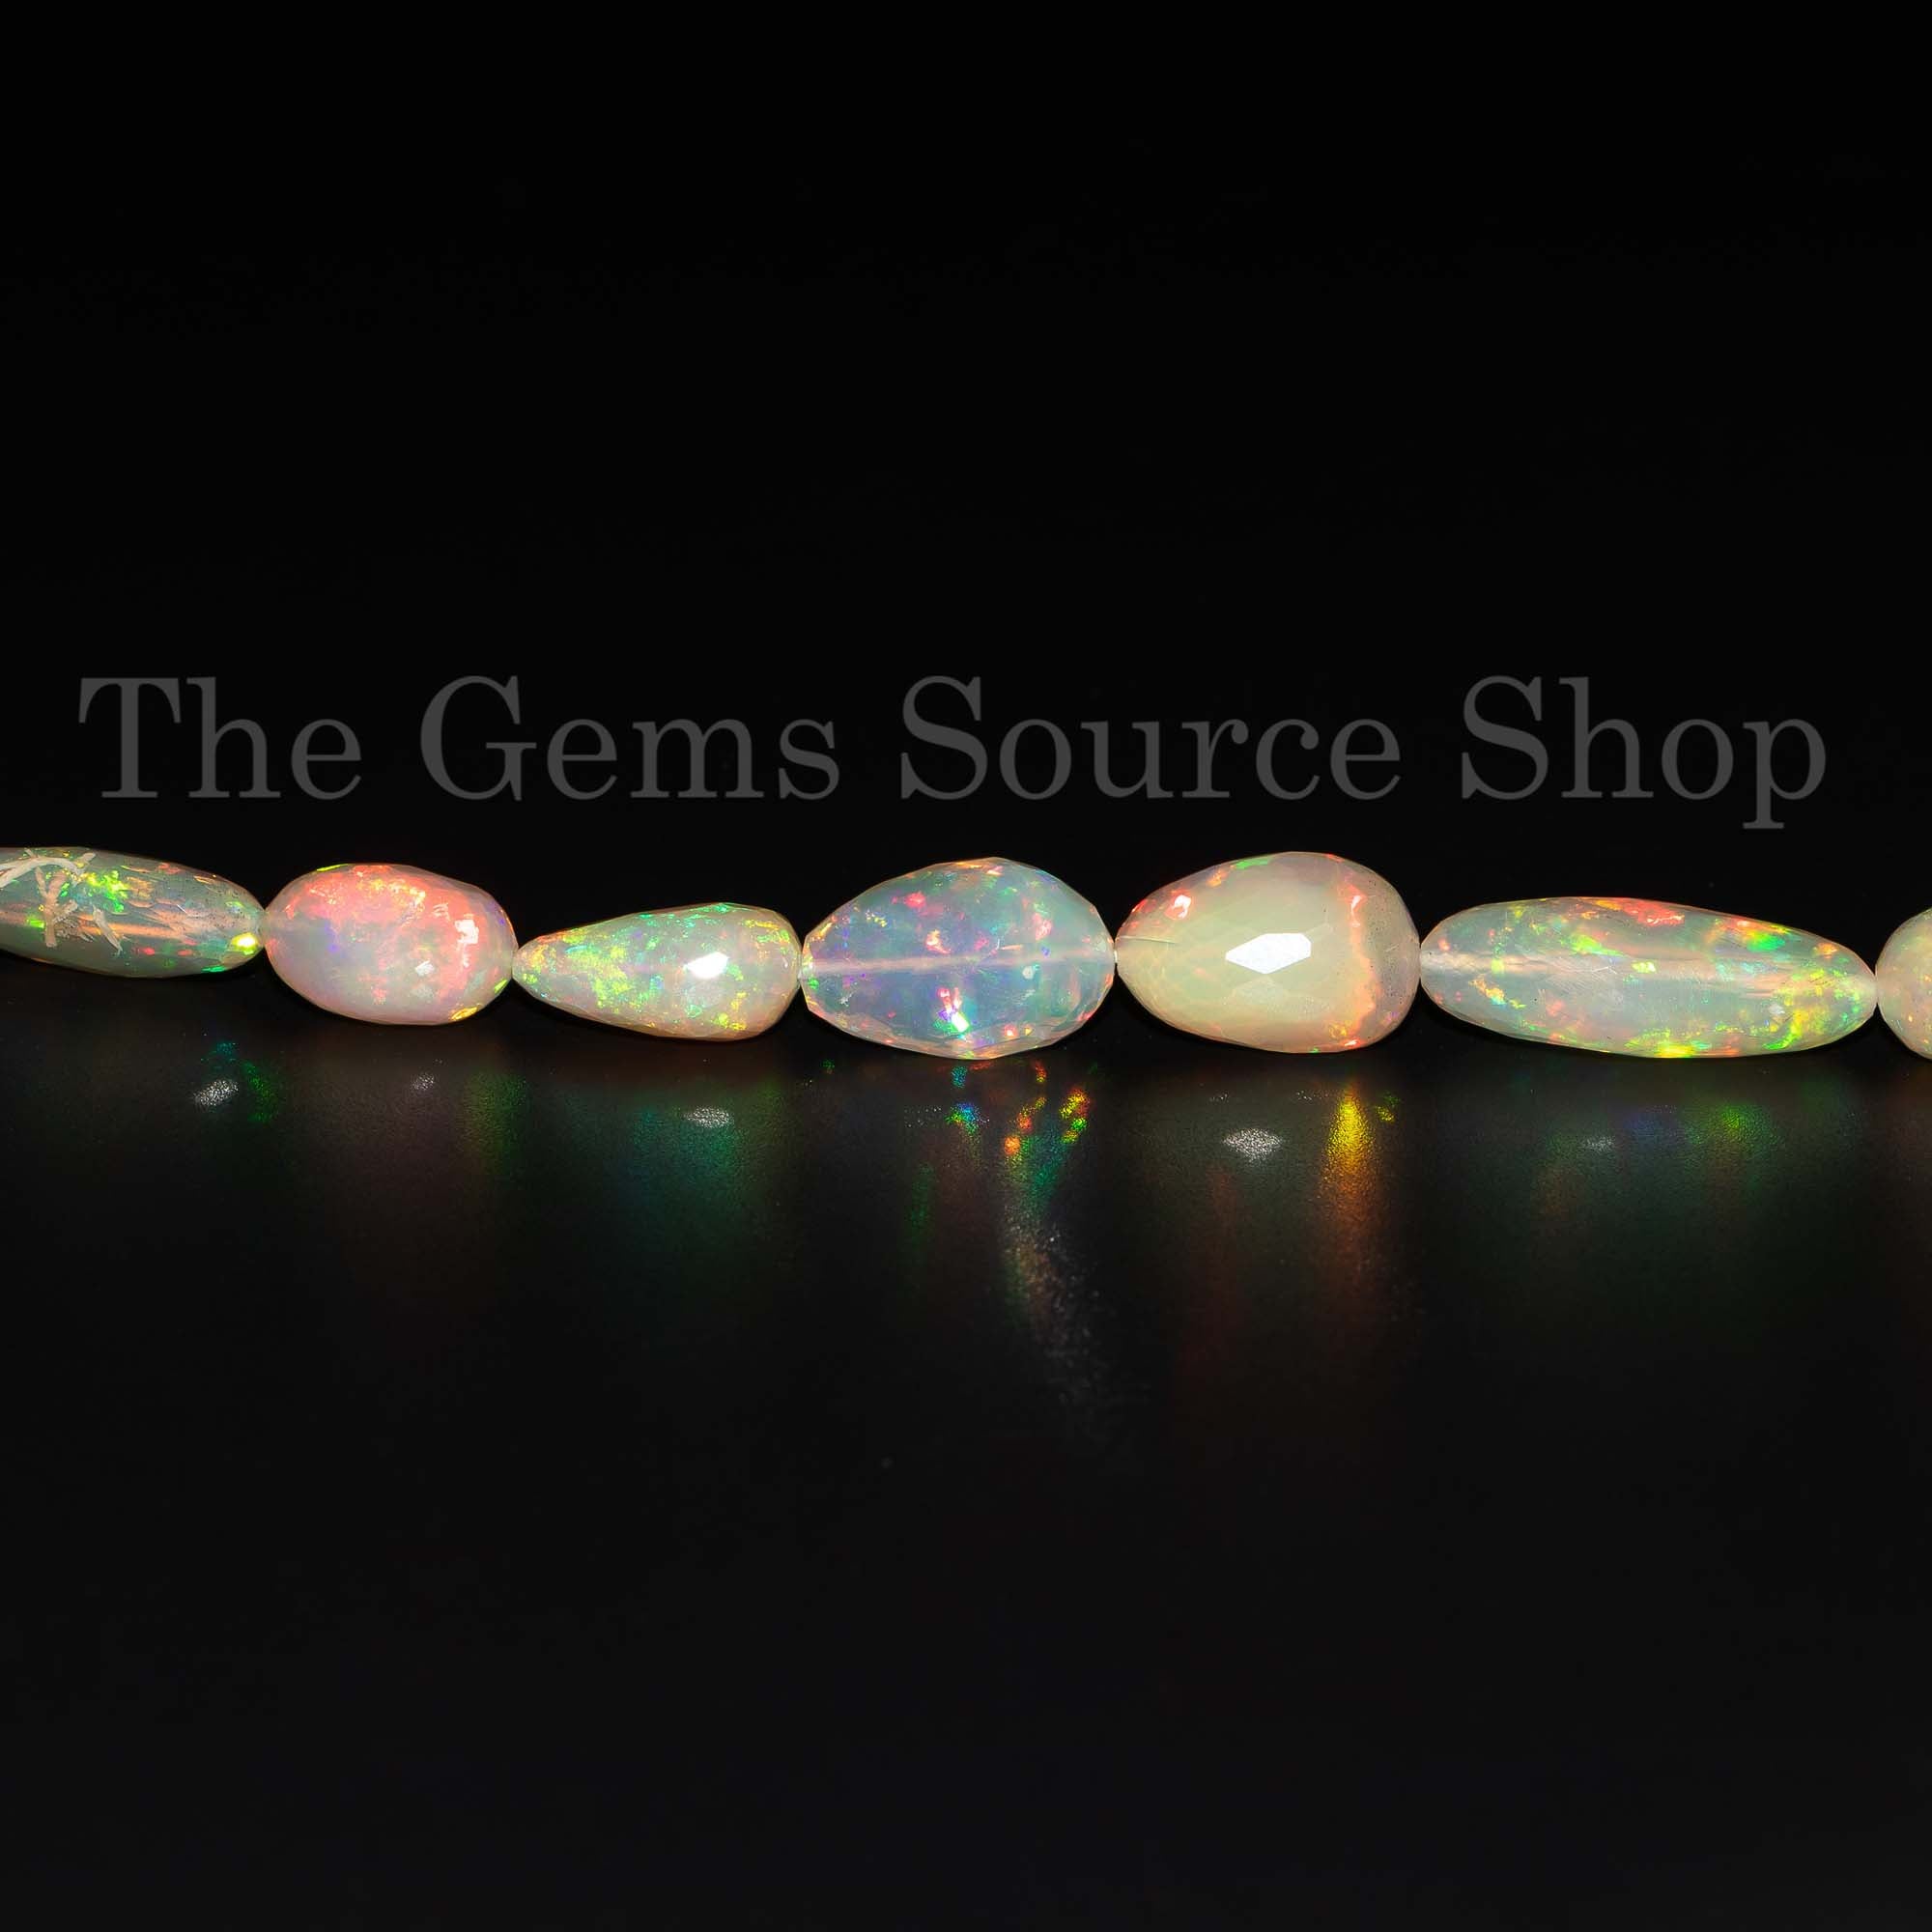 8x10.5-11x23mm Natural Ethiopian Opal Necklace, Top Quality Opal Beads, Faceted Fire Opal Necklace, Ethiopian Opal Beads, Women Necklace